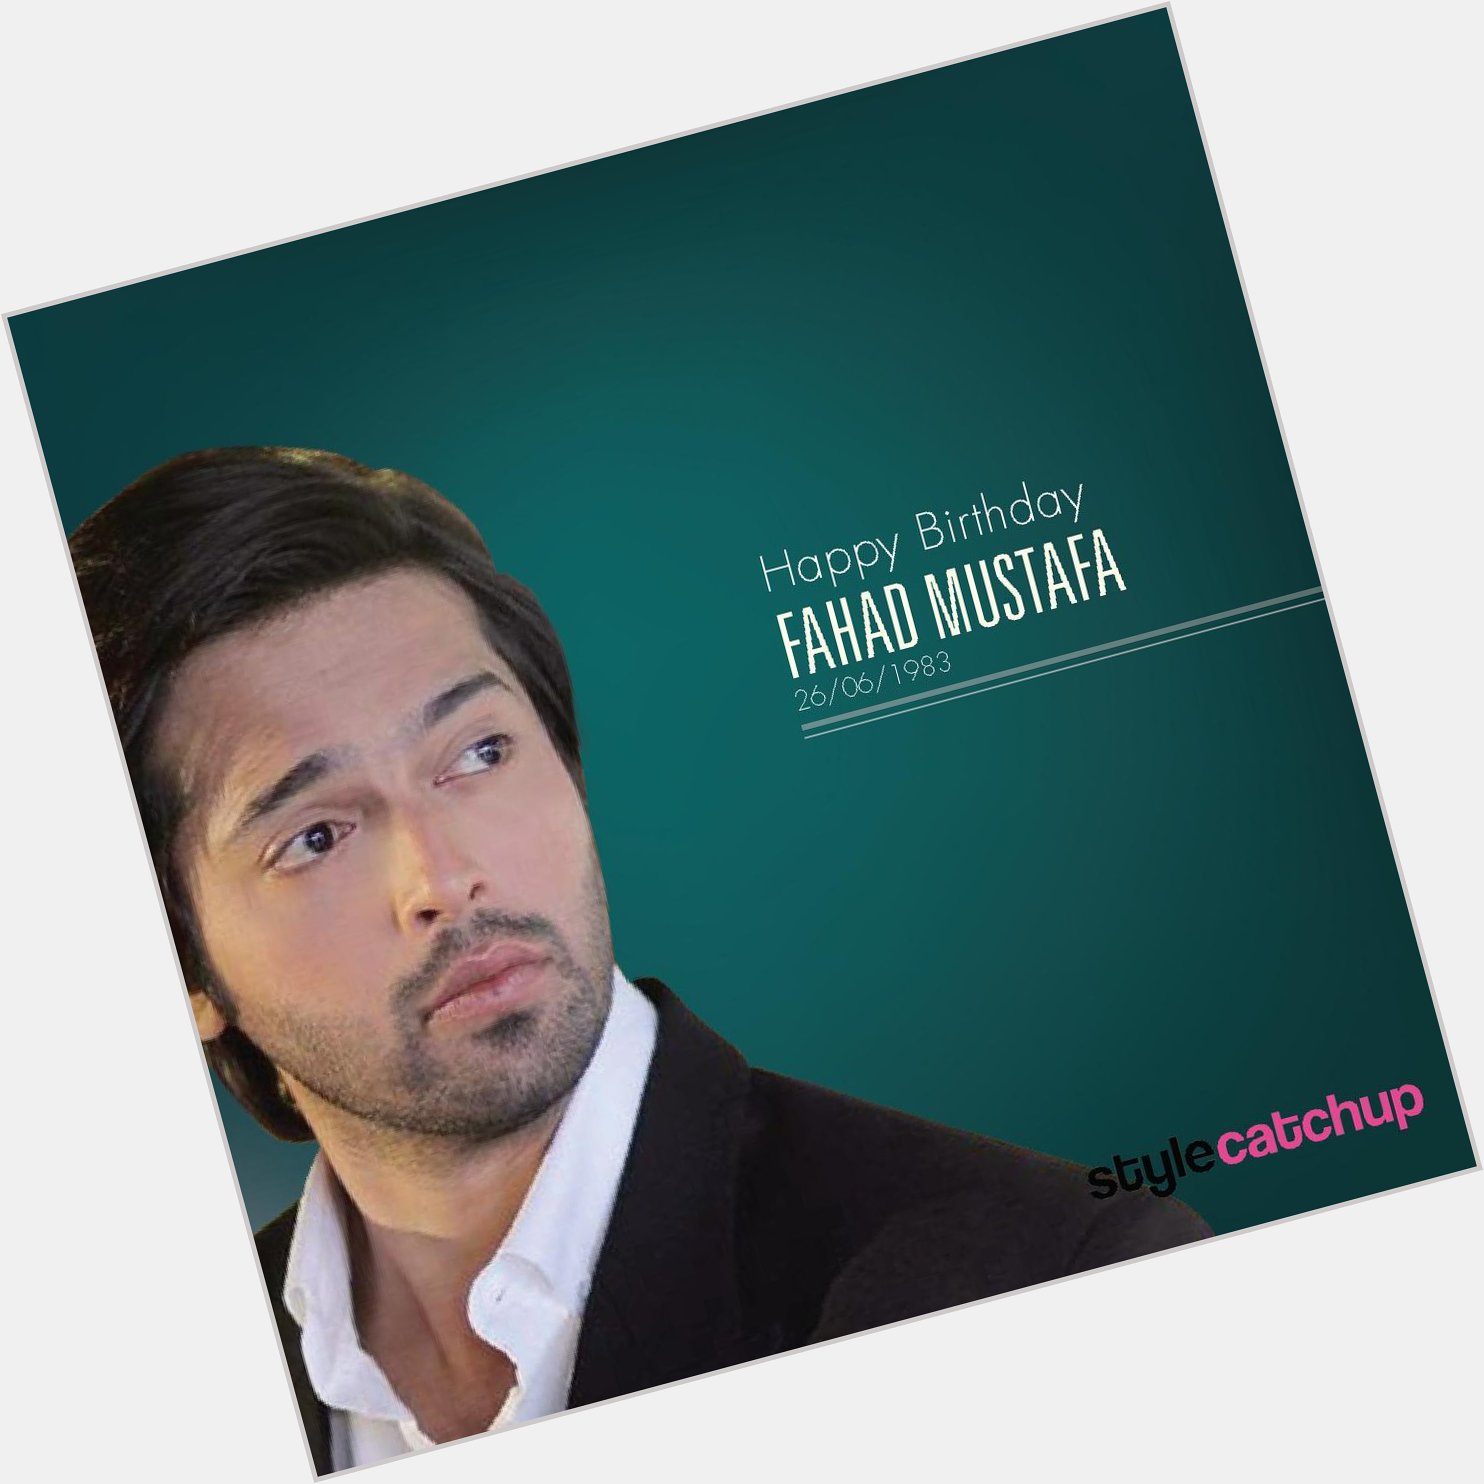 A very Happy Birthday to Fahad Mustafa! Best of luck for future endeavors!   